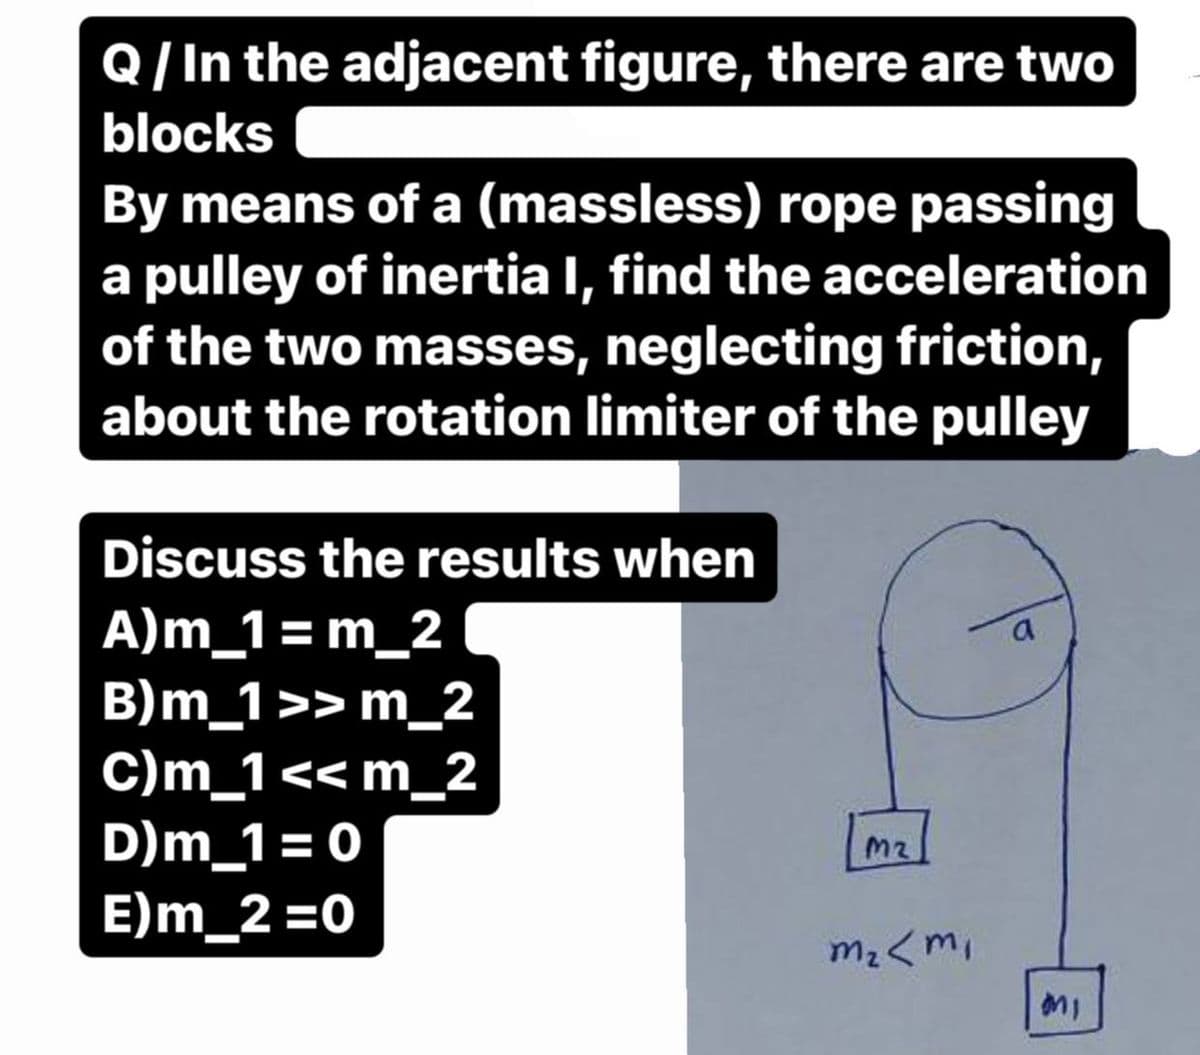 Q/In the adjacent figure, there are two
blocks
By means of a (massless) rope passing
a pulley of inertia I, find the acceleration
of the two masses, neglecting friction,
about the rotation limiter of the pulley
Discuss the results when
A)m_1= m_2
B)m_1 >>m_2
C)m_1 << m_2
D)m_1 = 0
E)m_2=0
M2
m₂ <m₁
a